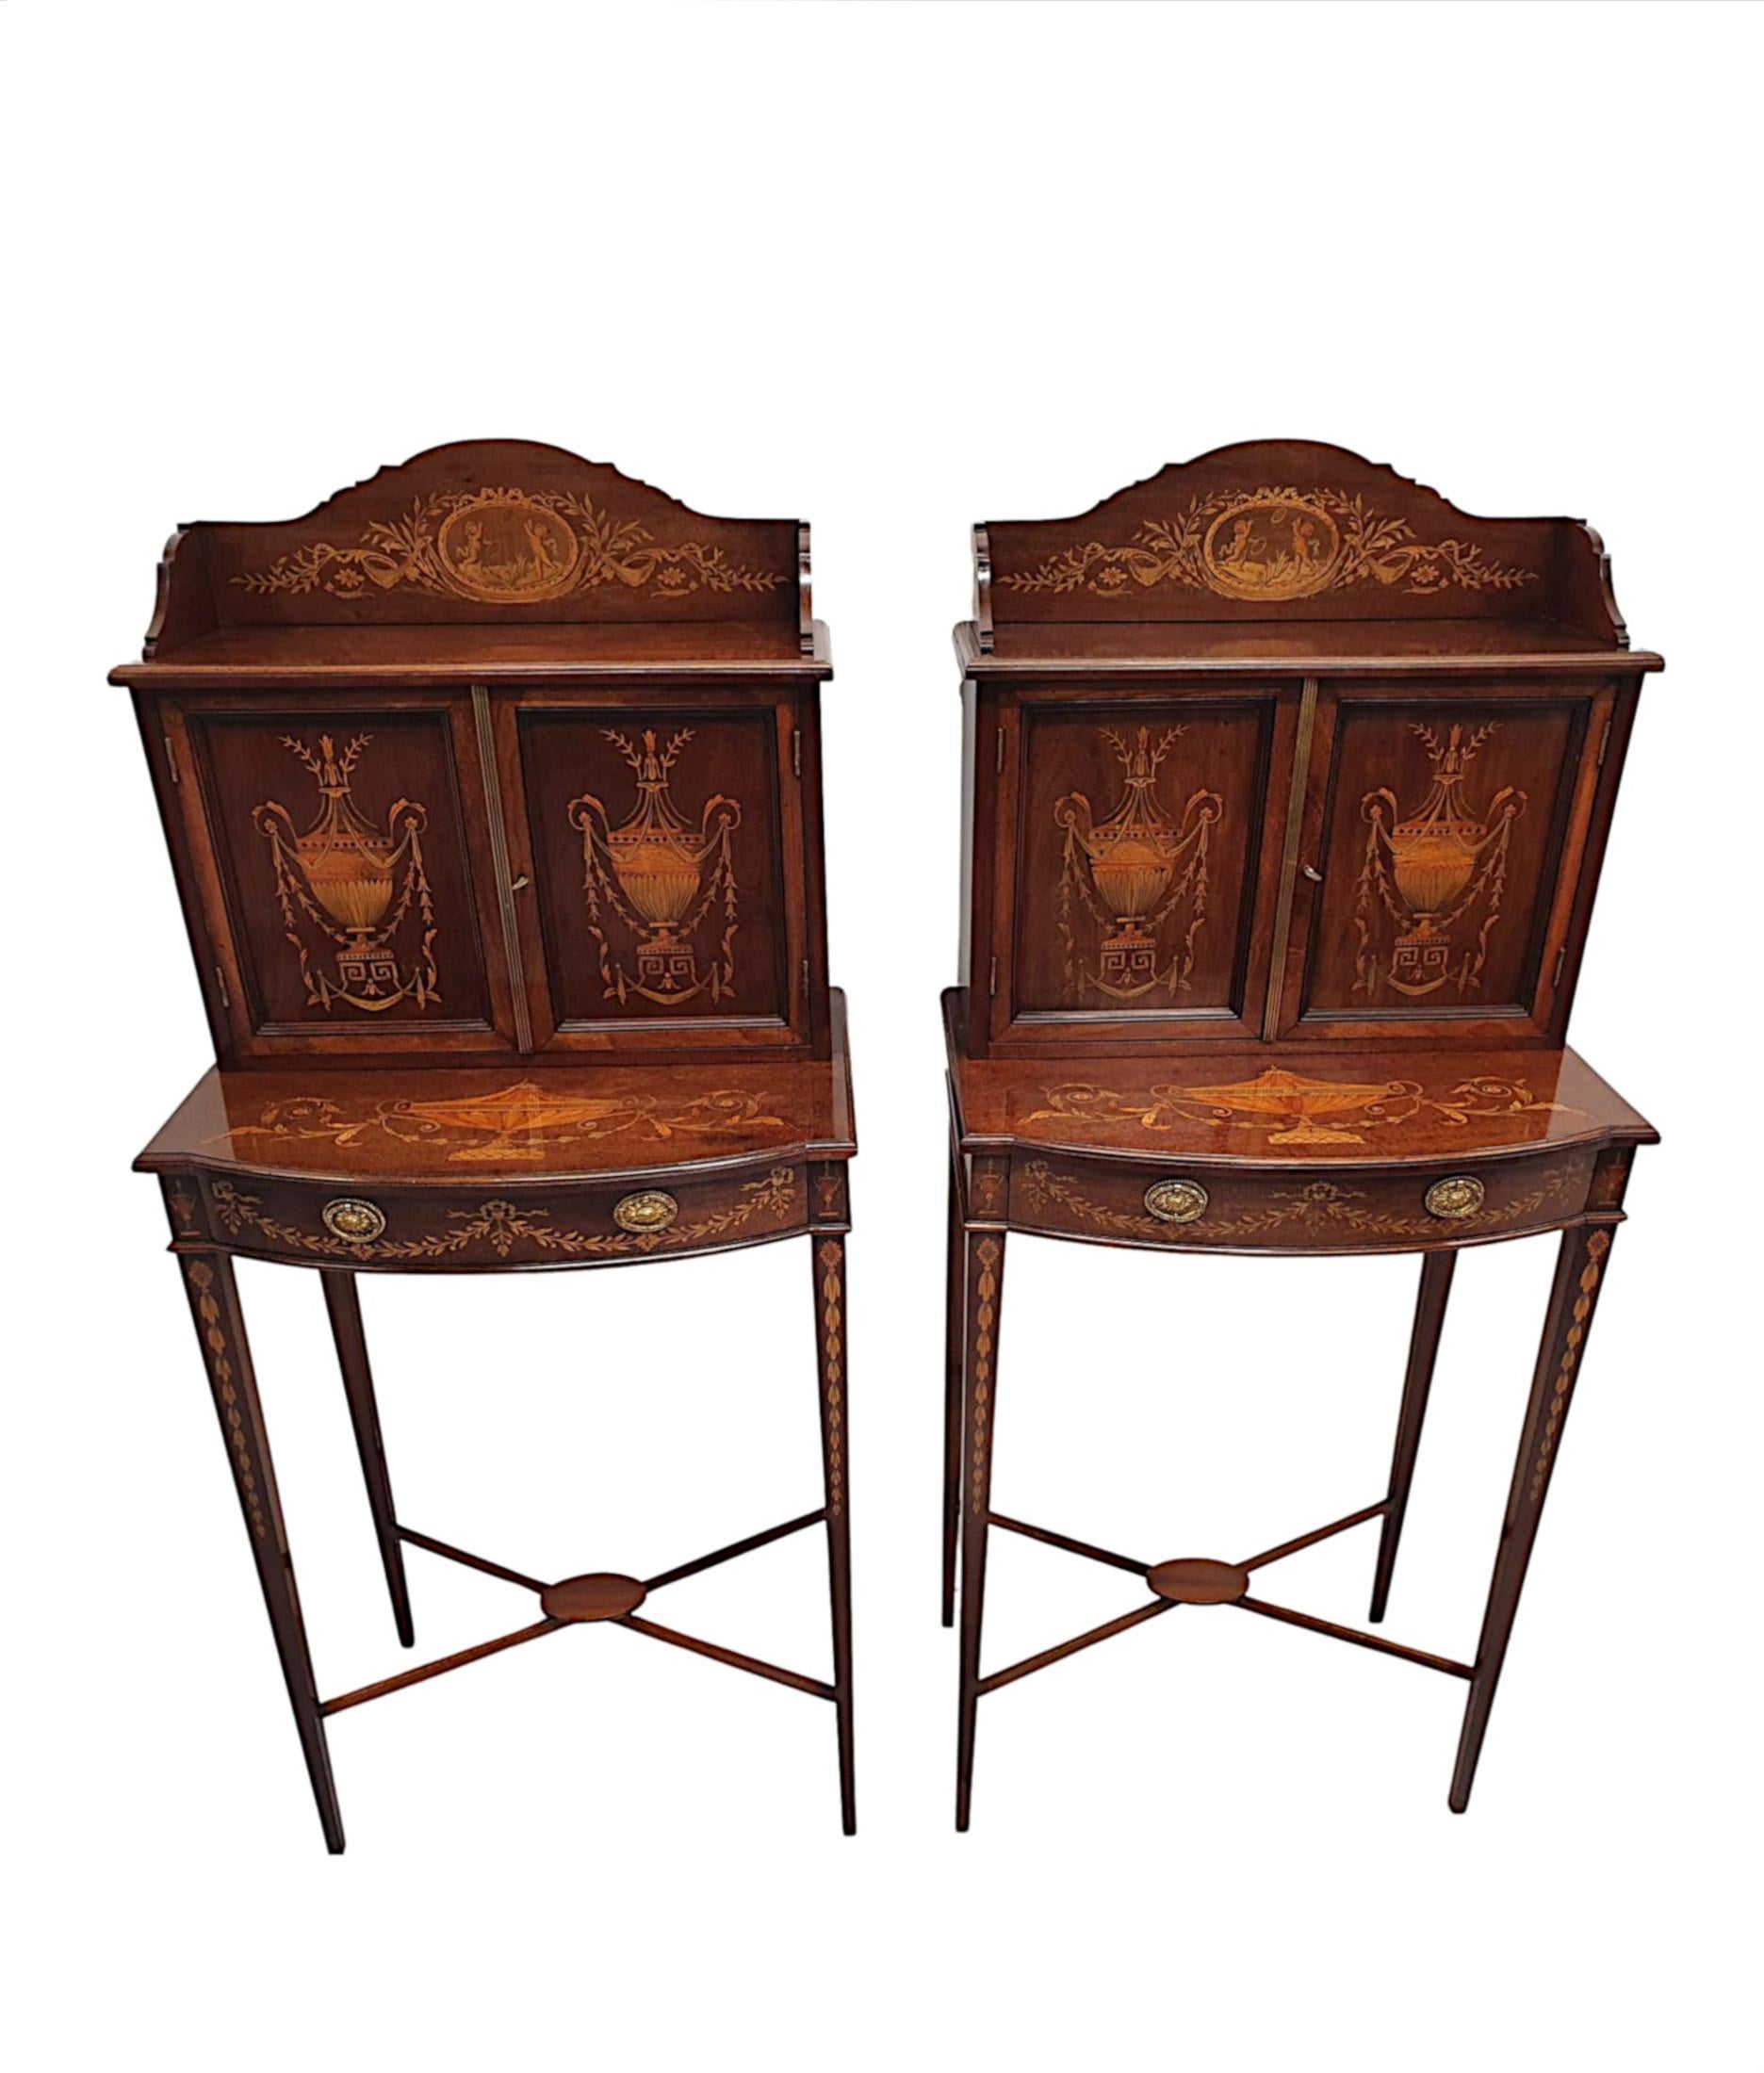 English  A Rare Pair of Exceptional Edwardian Cabinets Attributed to Edward and Roberts For Sale